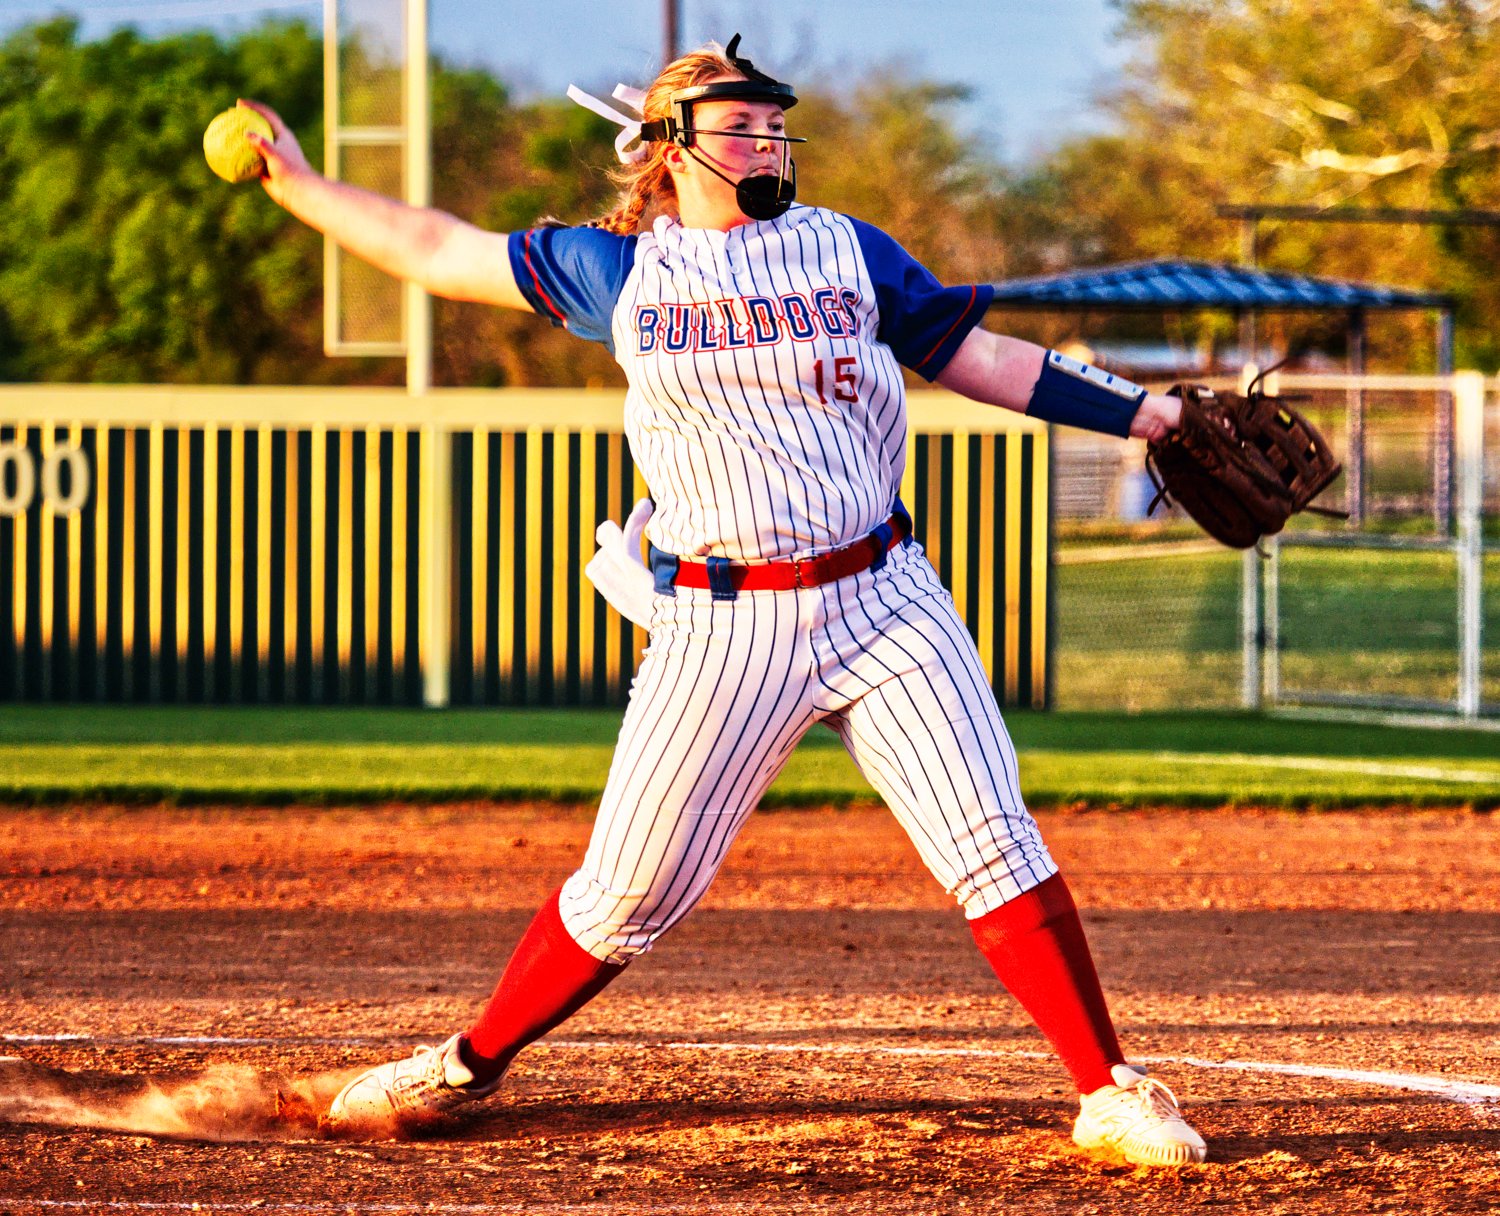 Kennedi Elmore throws a pitch in the middle innings of her complete game. [see more softball]